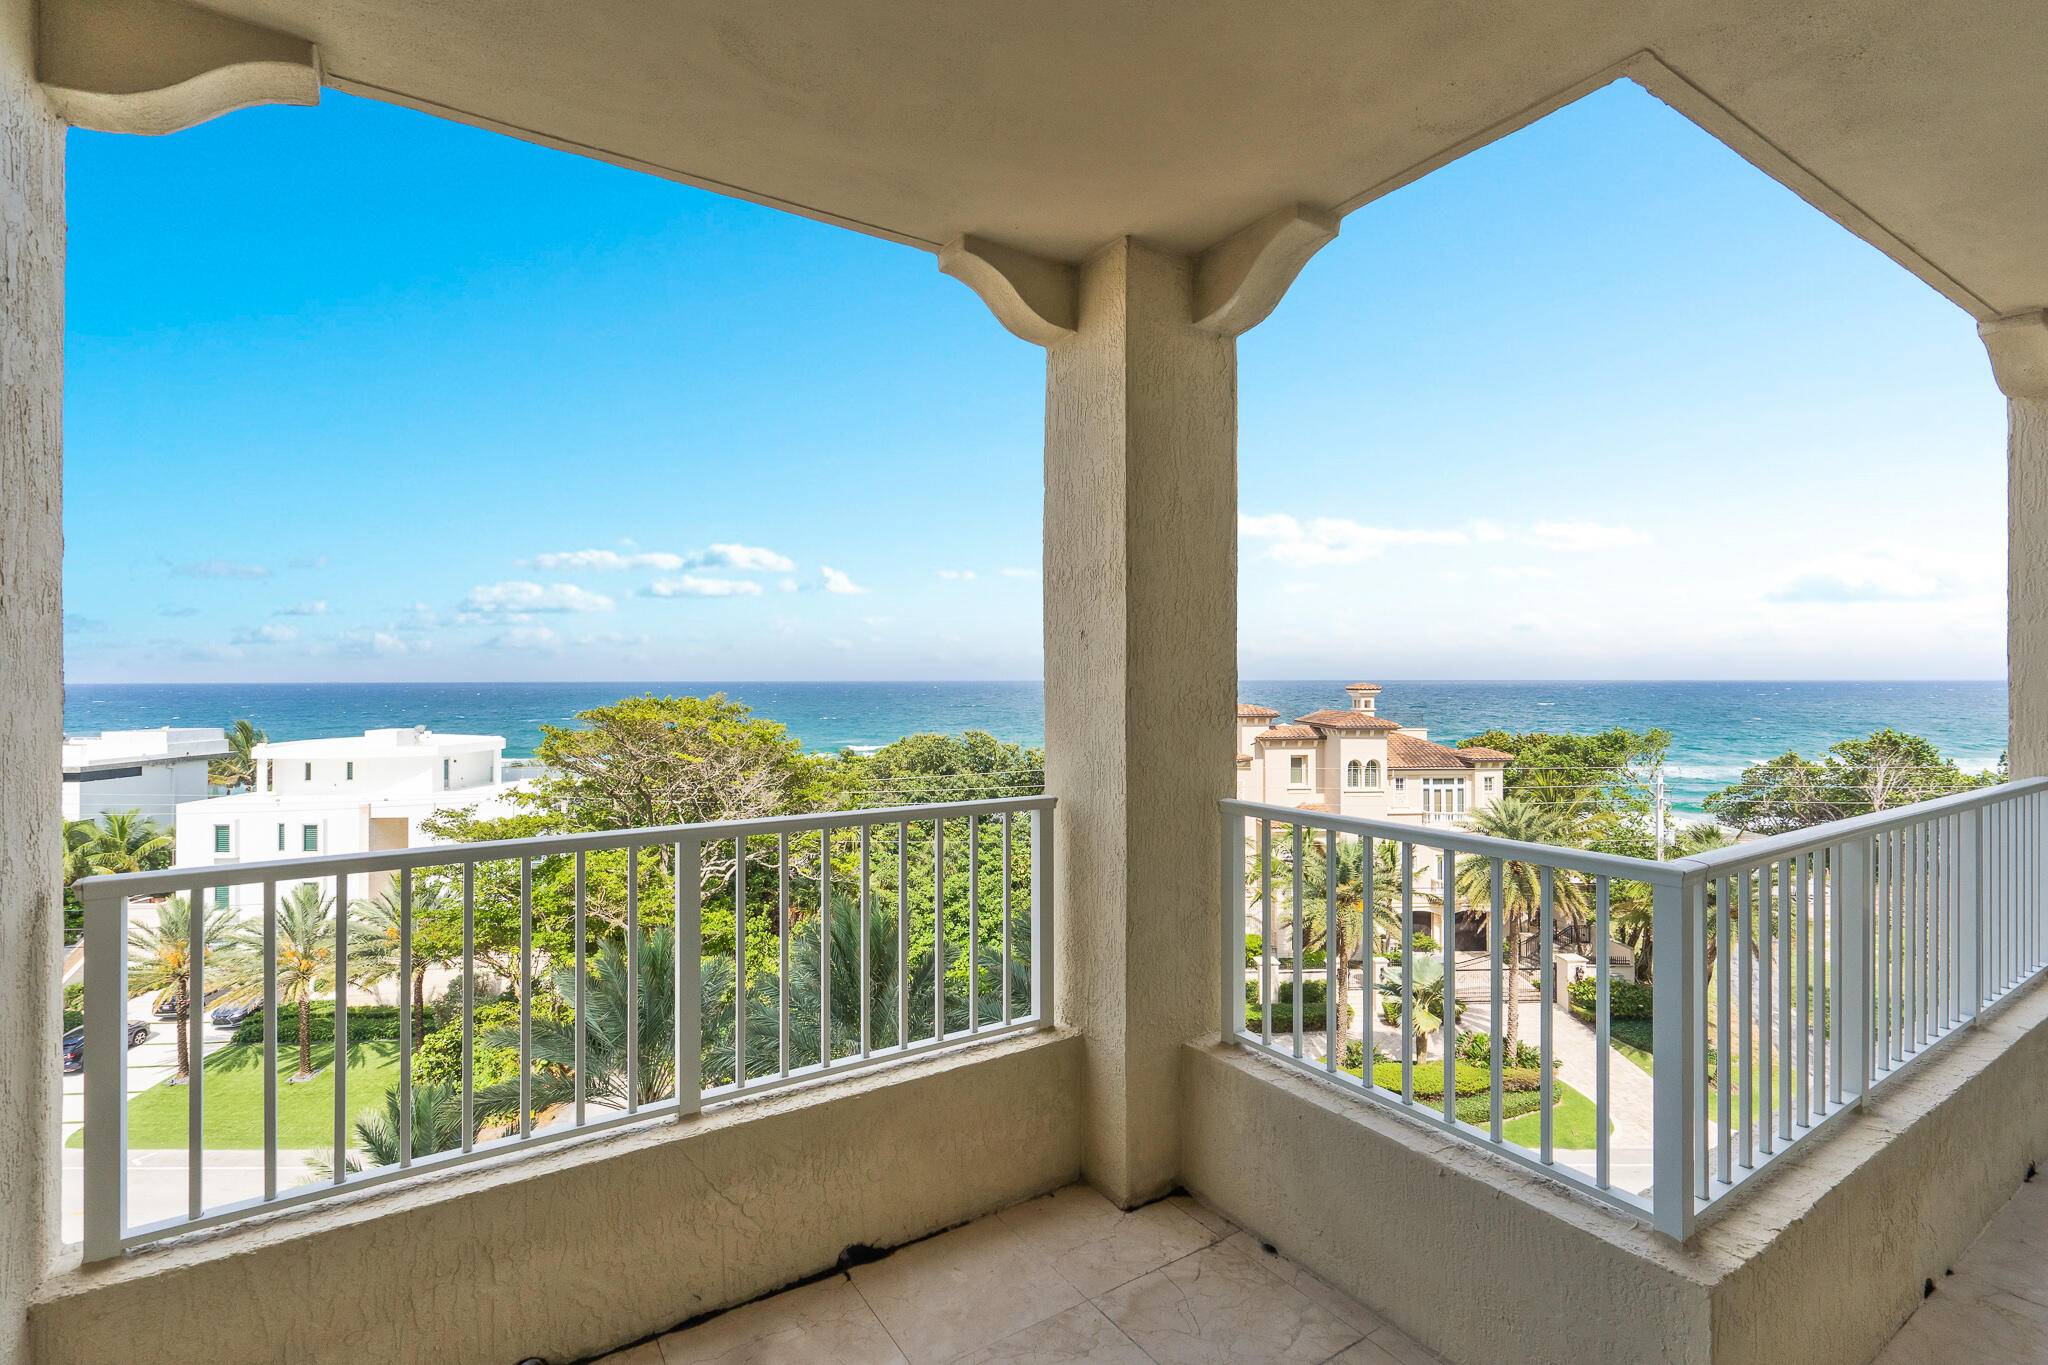 Luxuriously furnished off season rental at the ocean in Highland Beach, a short distance from Boca Raton and Delray Beach.